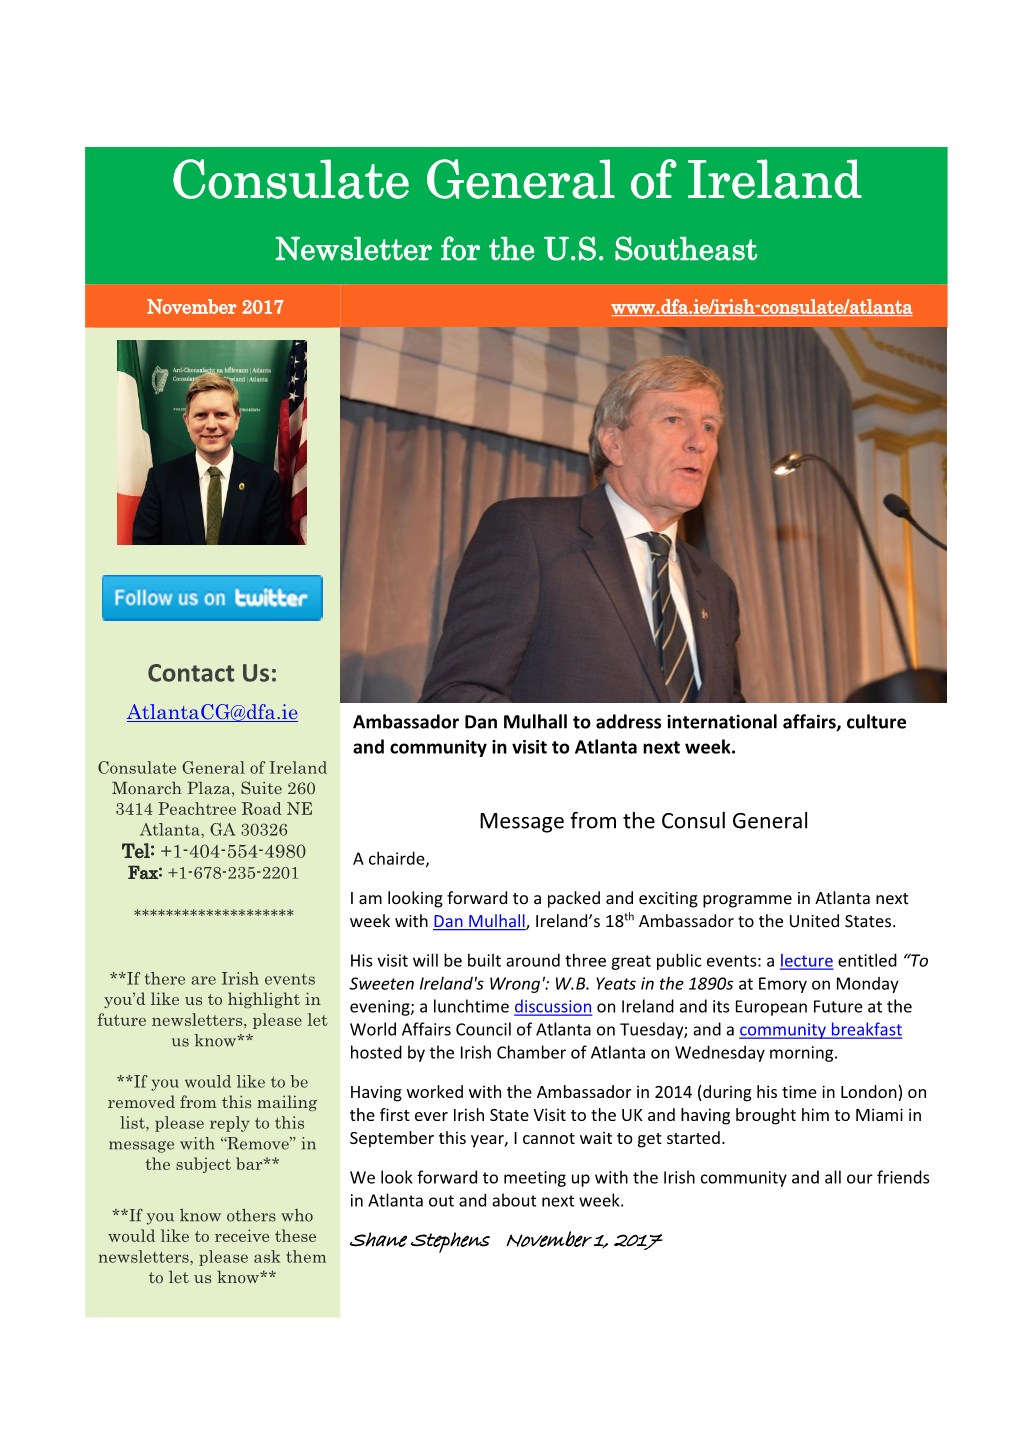 Consulate General of Ireland Newsletter for the U.S